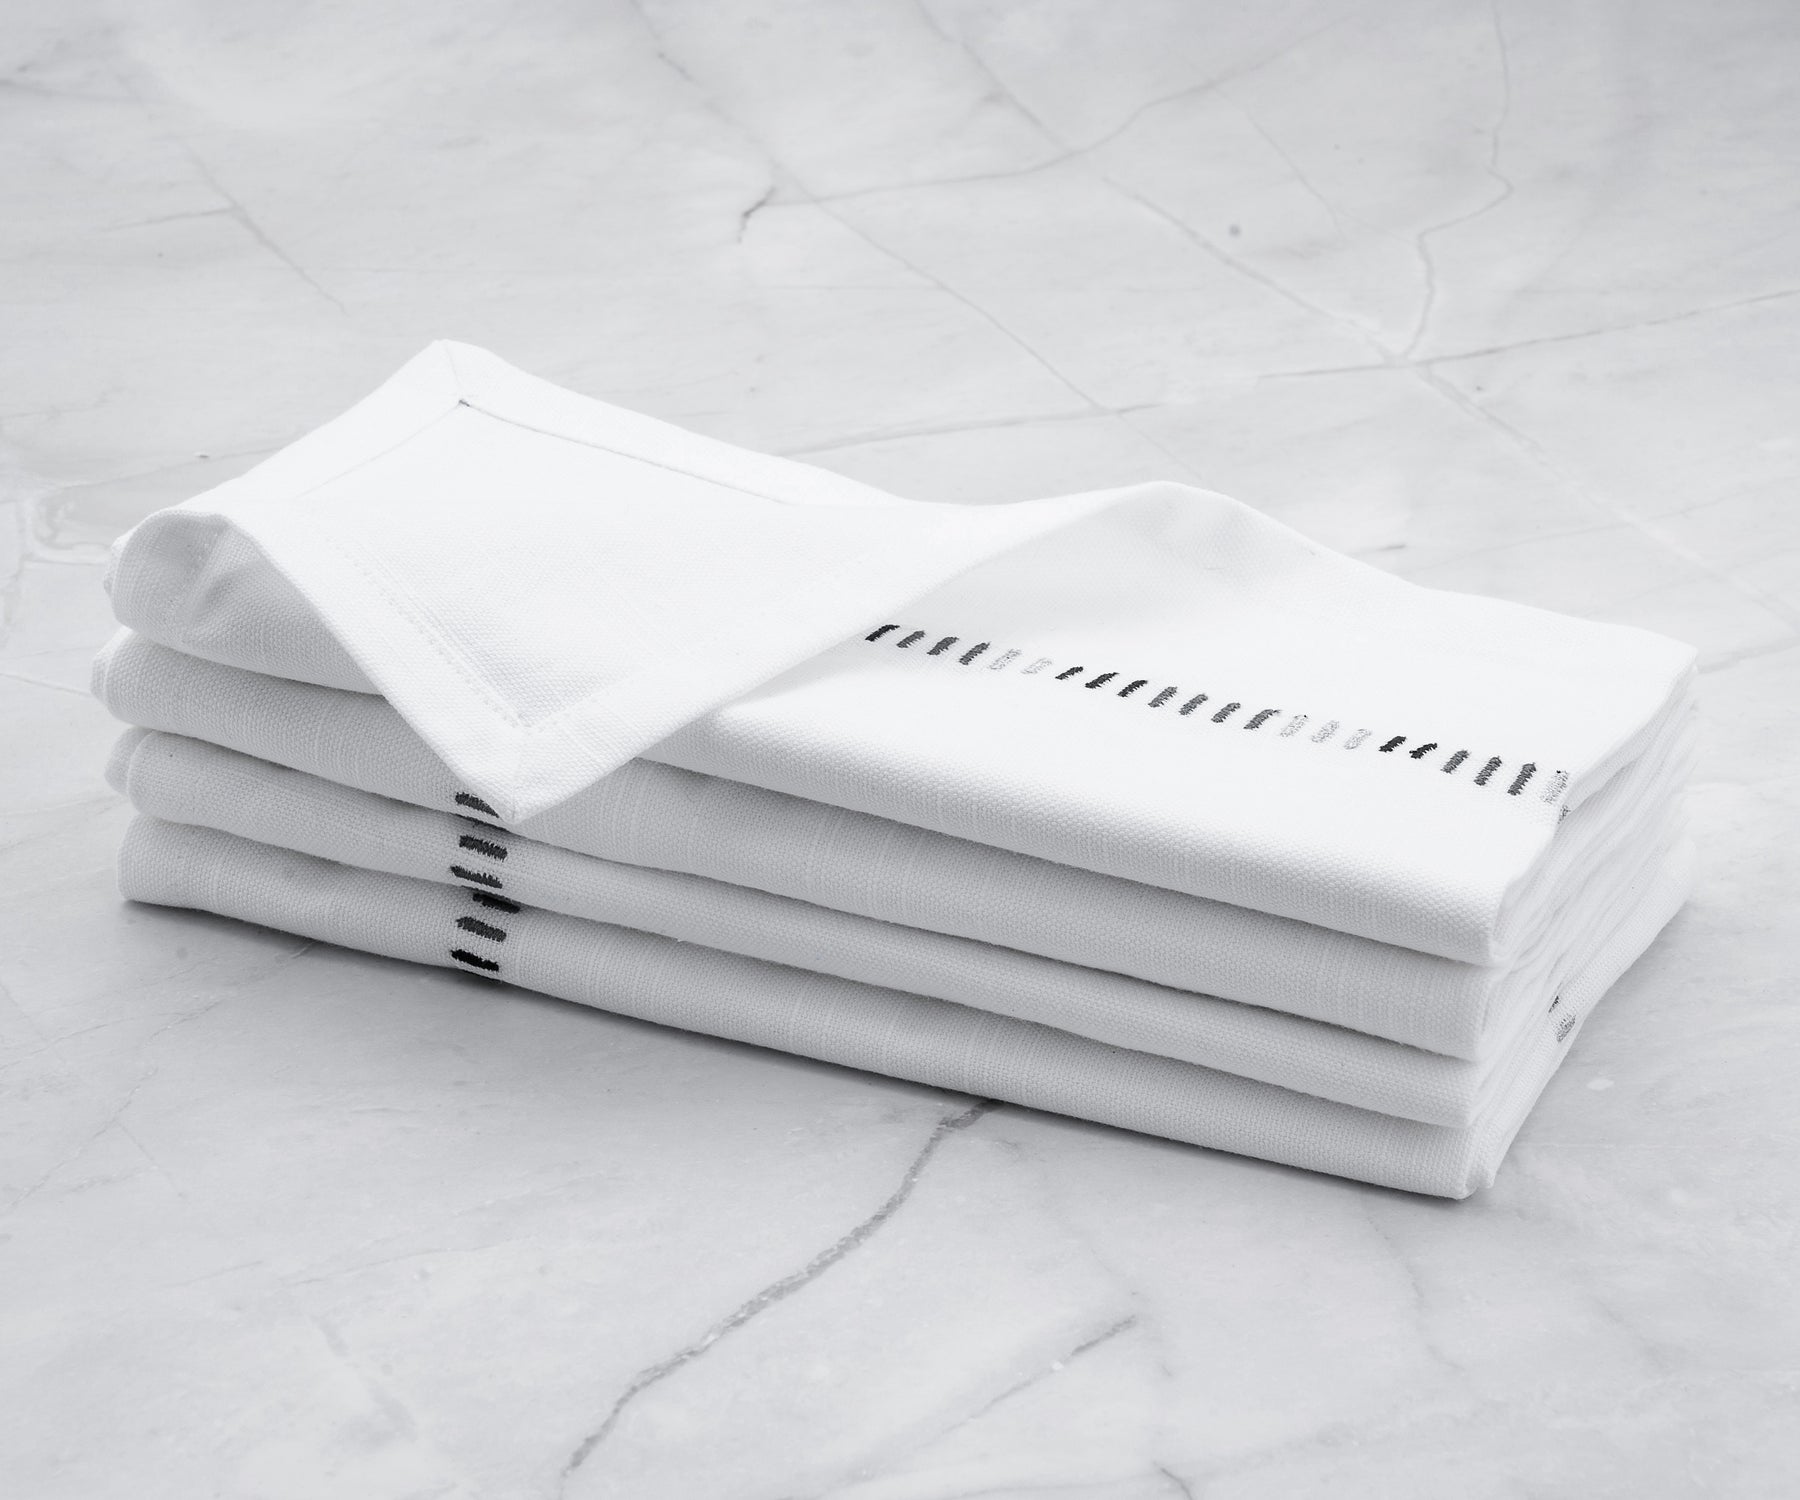 Chic black and white napkins for a modern aesthetic